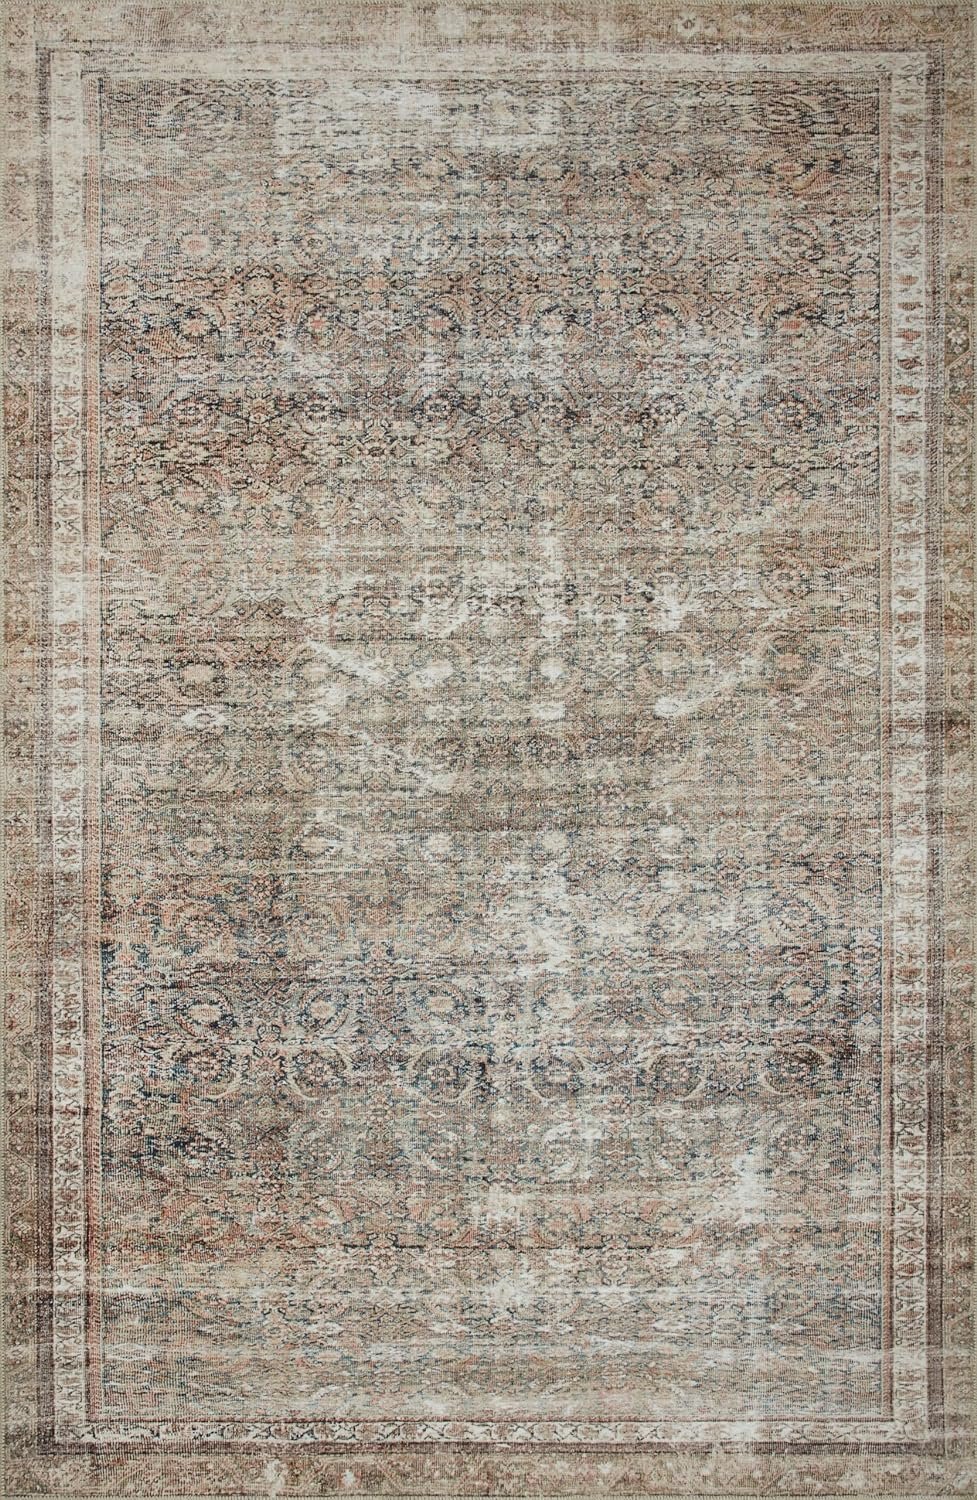 Amazon - $36.39 - Loloi Chris Loves Julia Jules Collection JUL-09 Ink/Terracotta Accent Rug